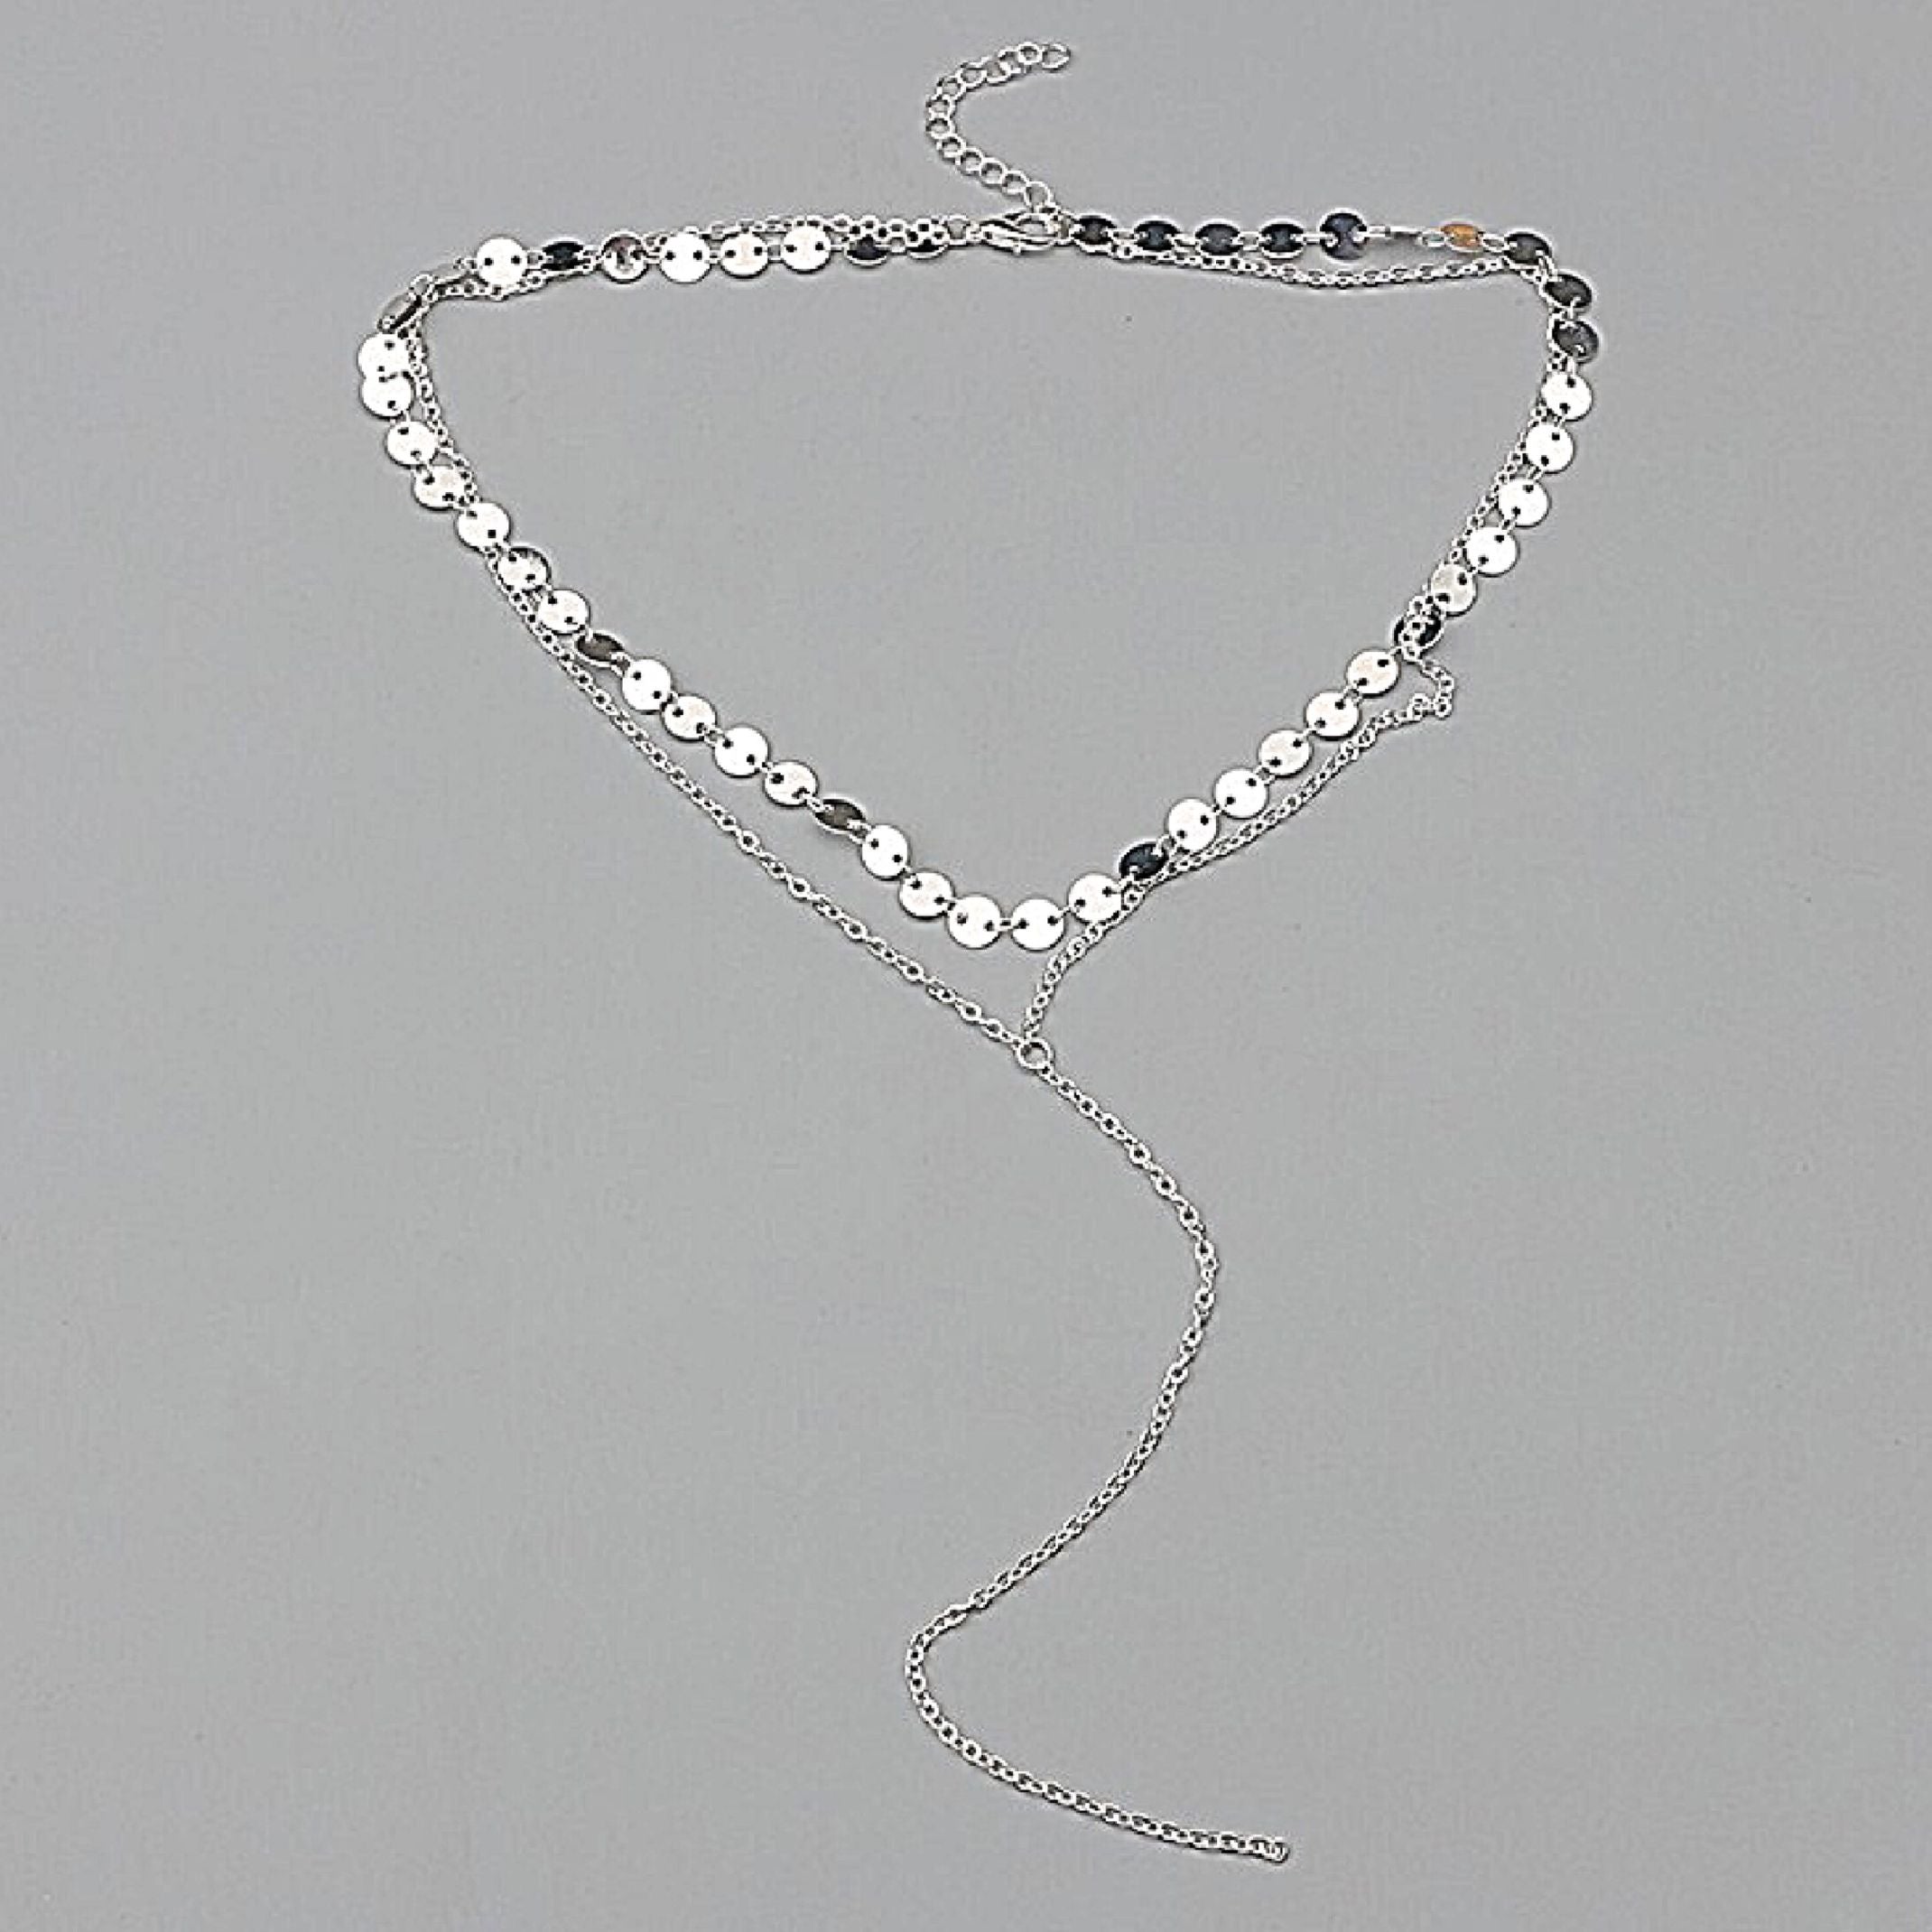 Silver sequin layered necklace 